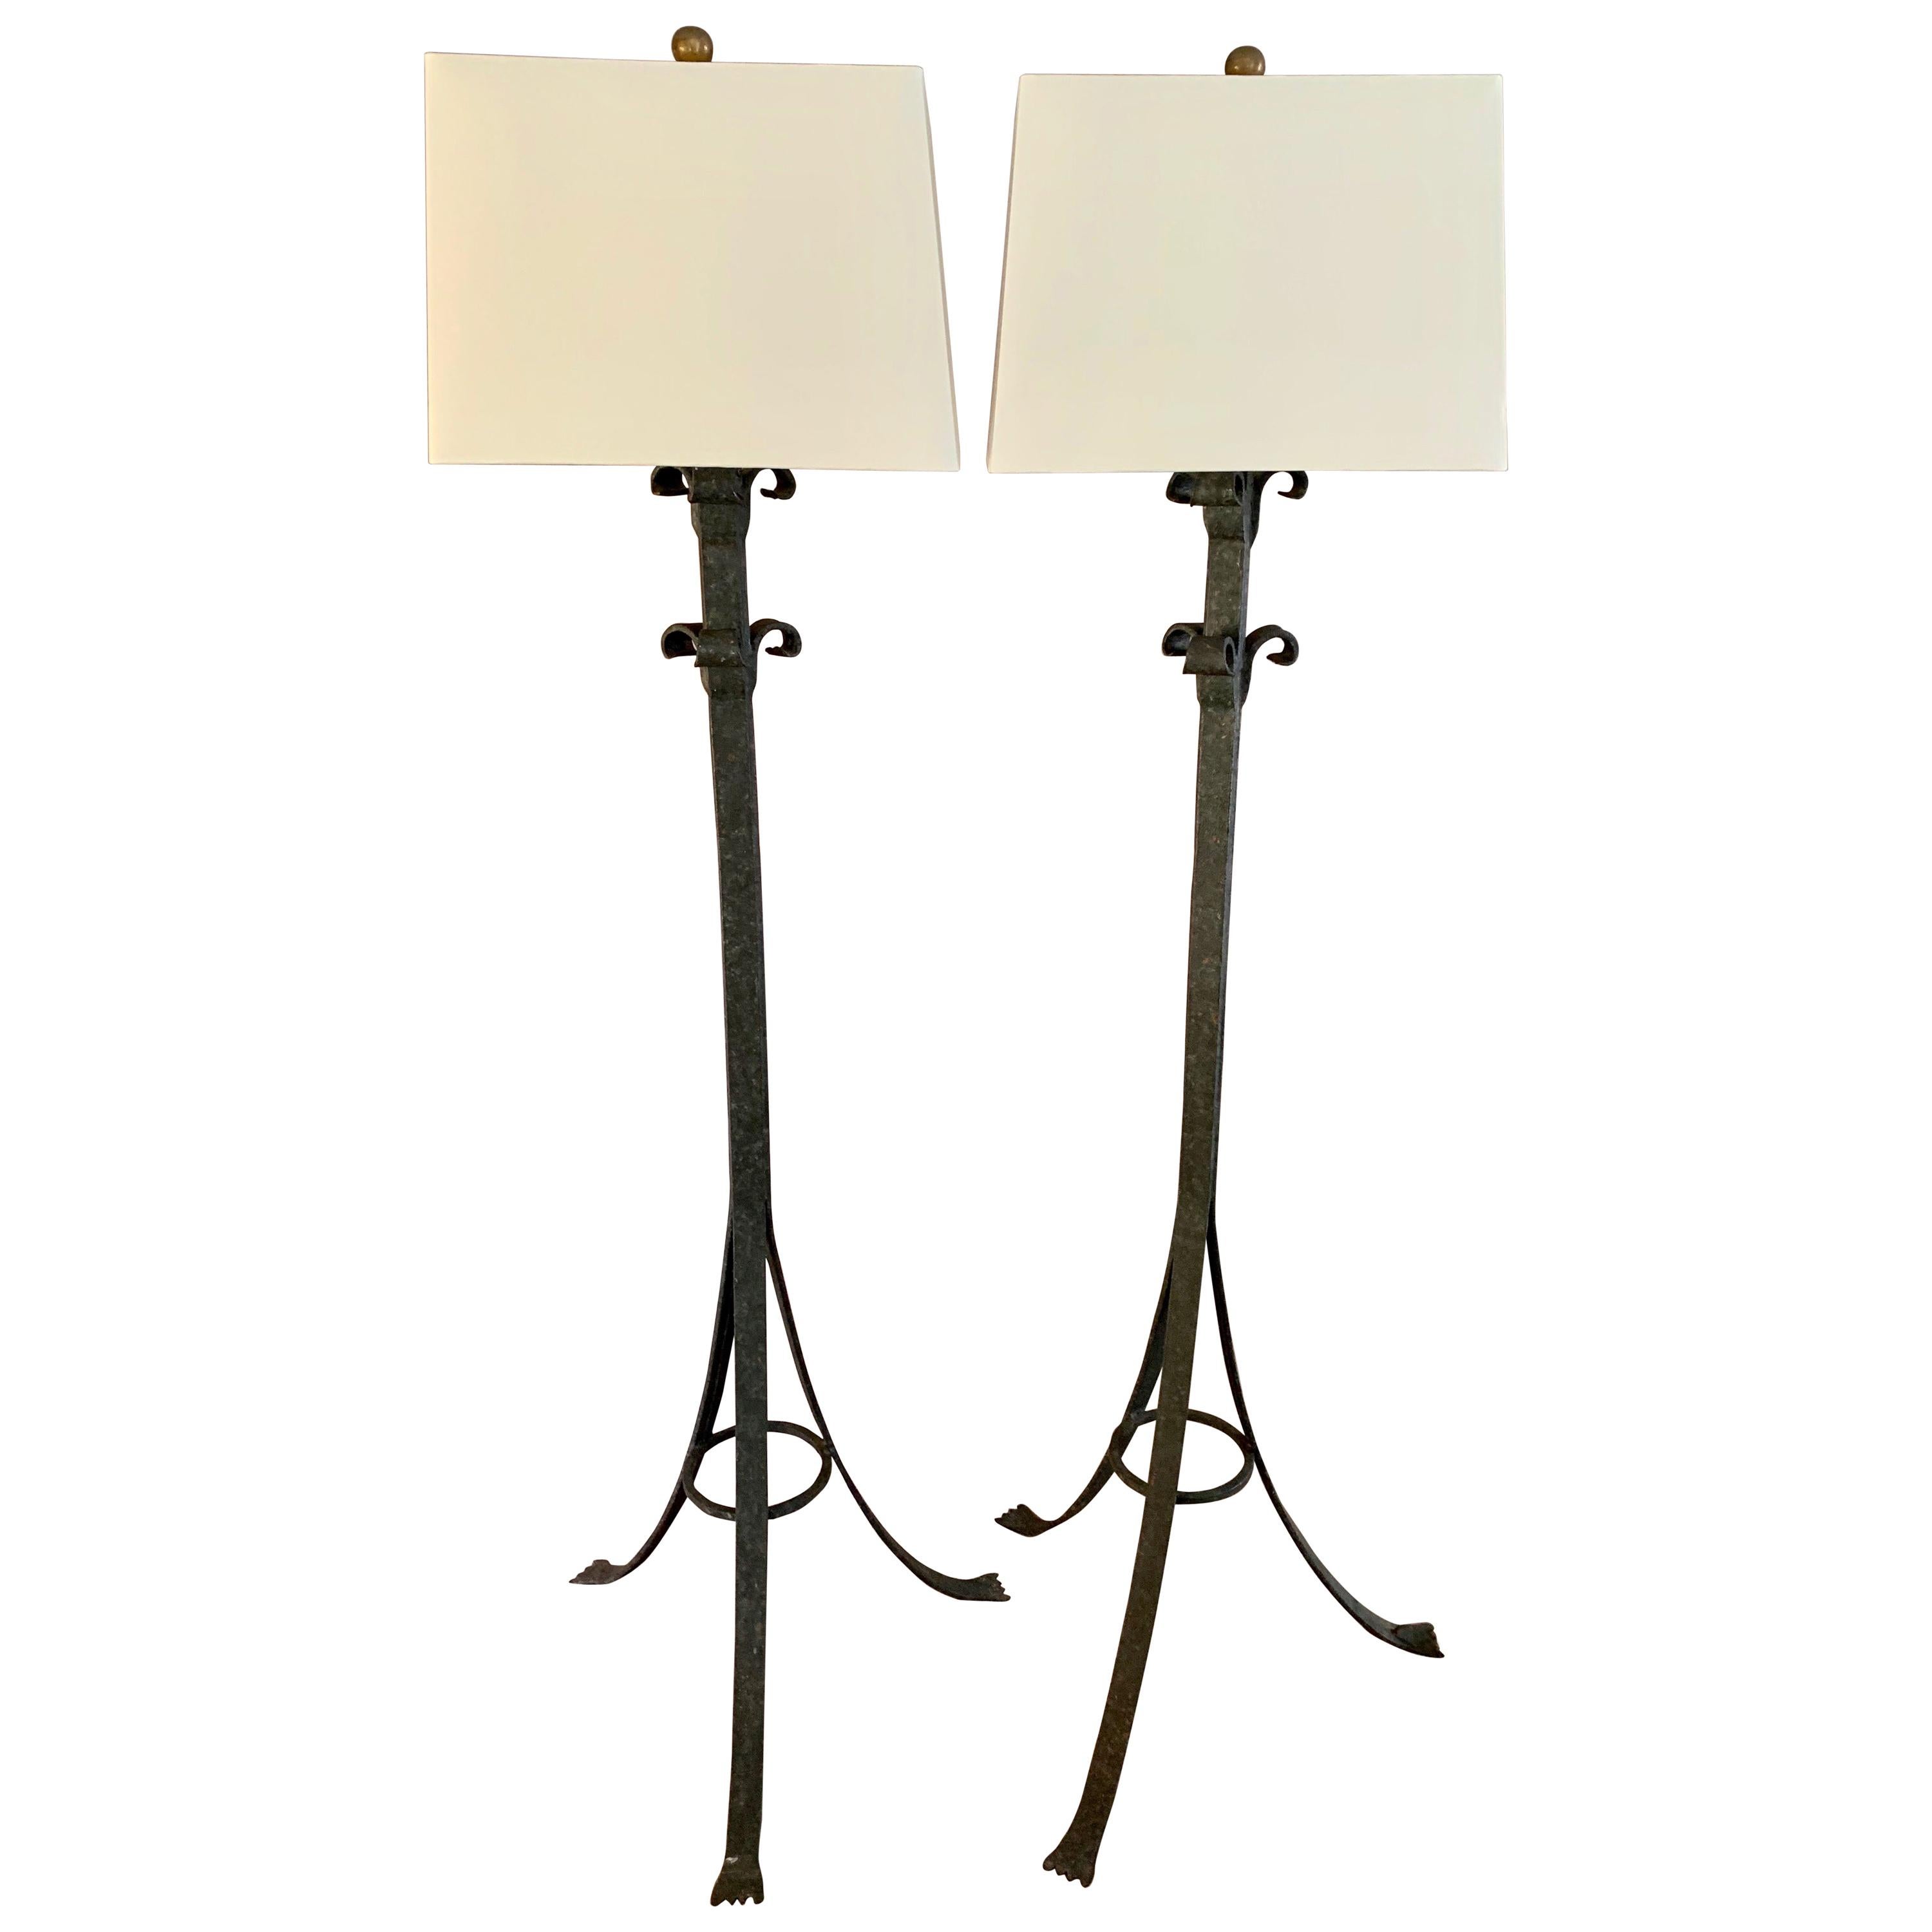 Pair of Wrought Iron Floor Lamps